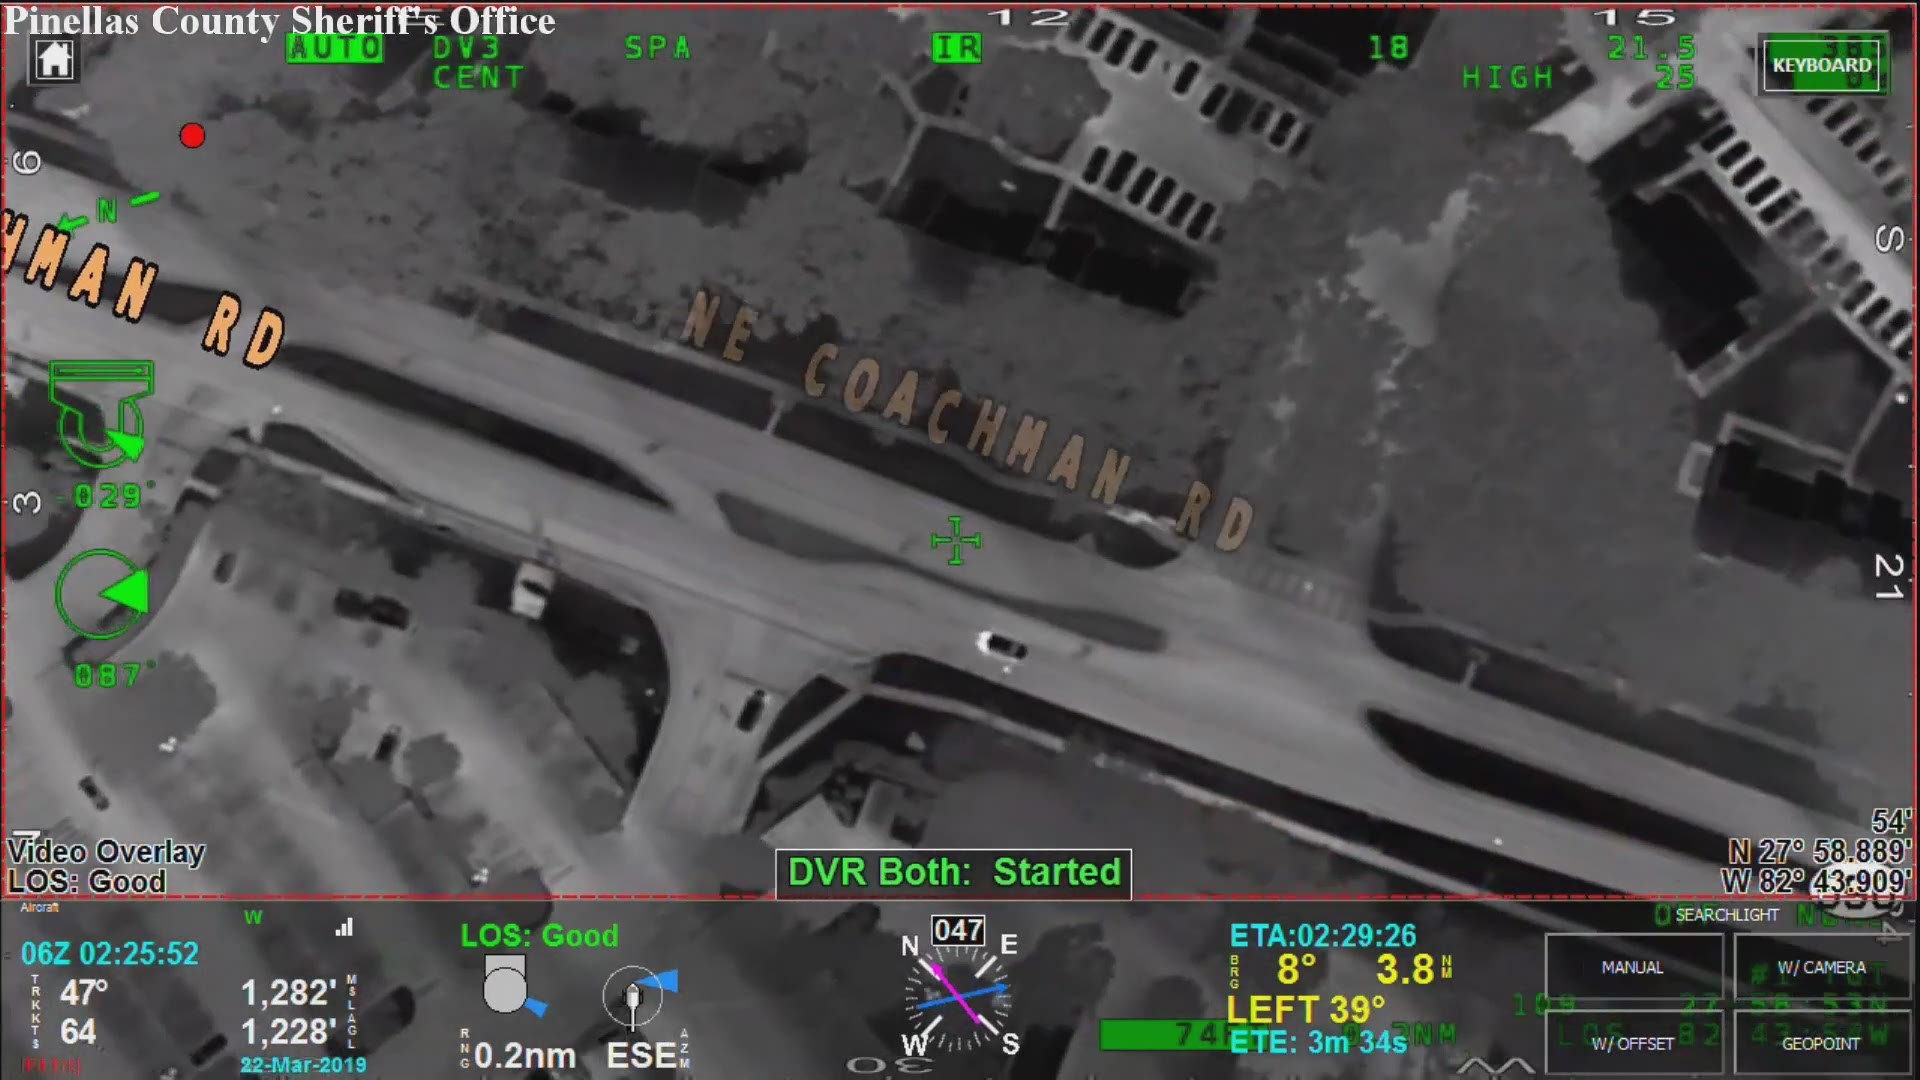 Helicopter video shows two teens arrested after fleeing in a stolen car.